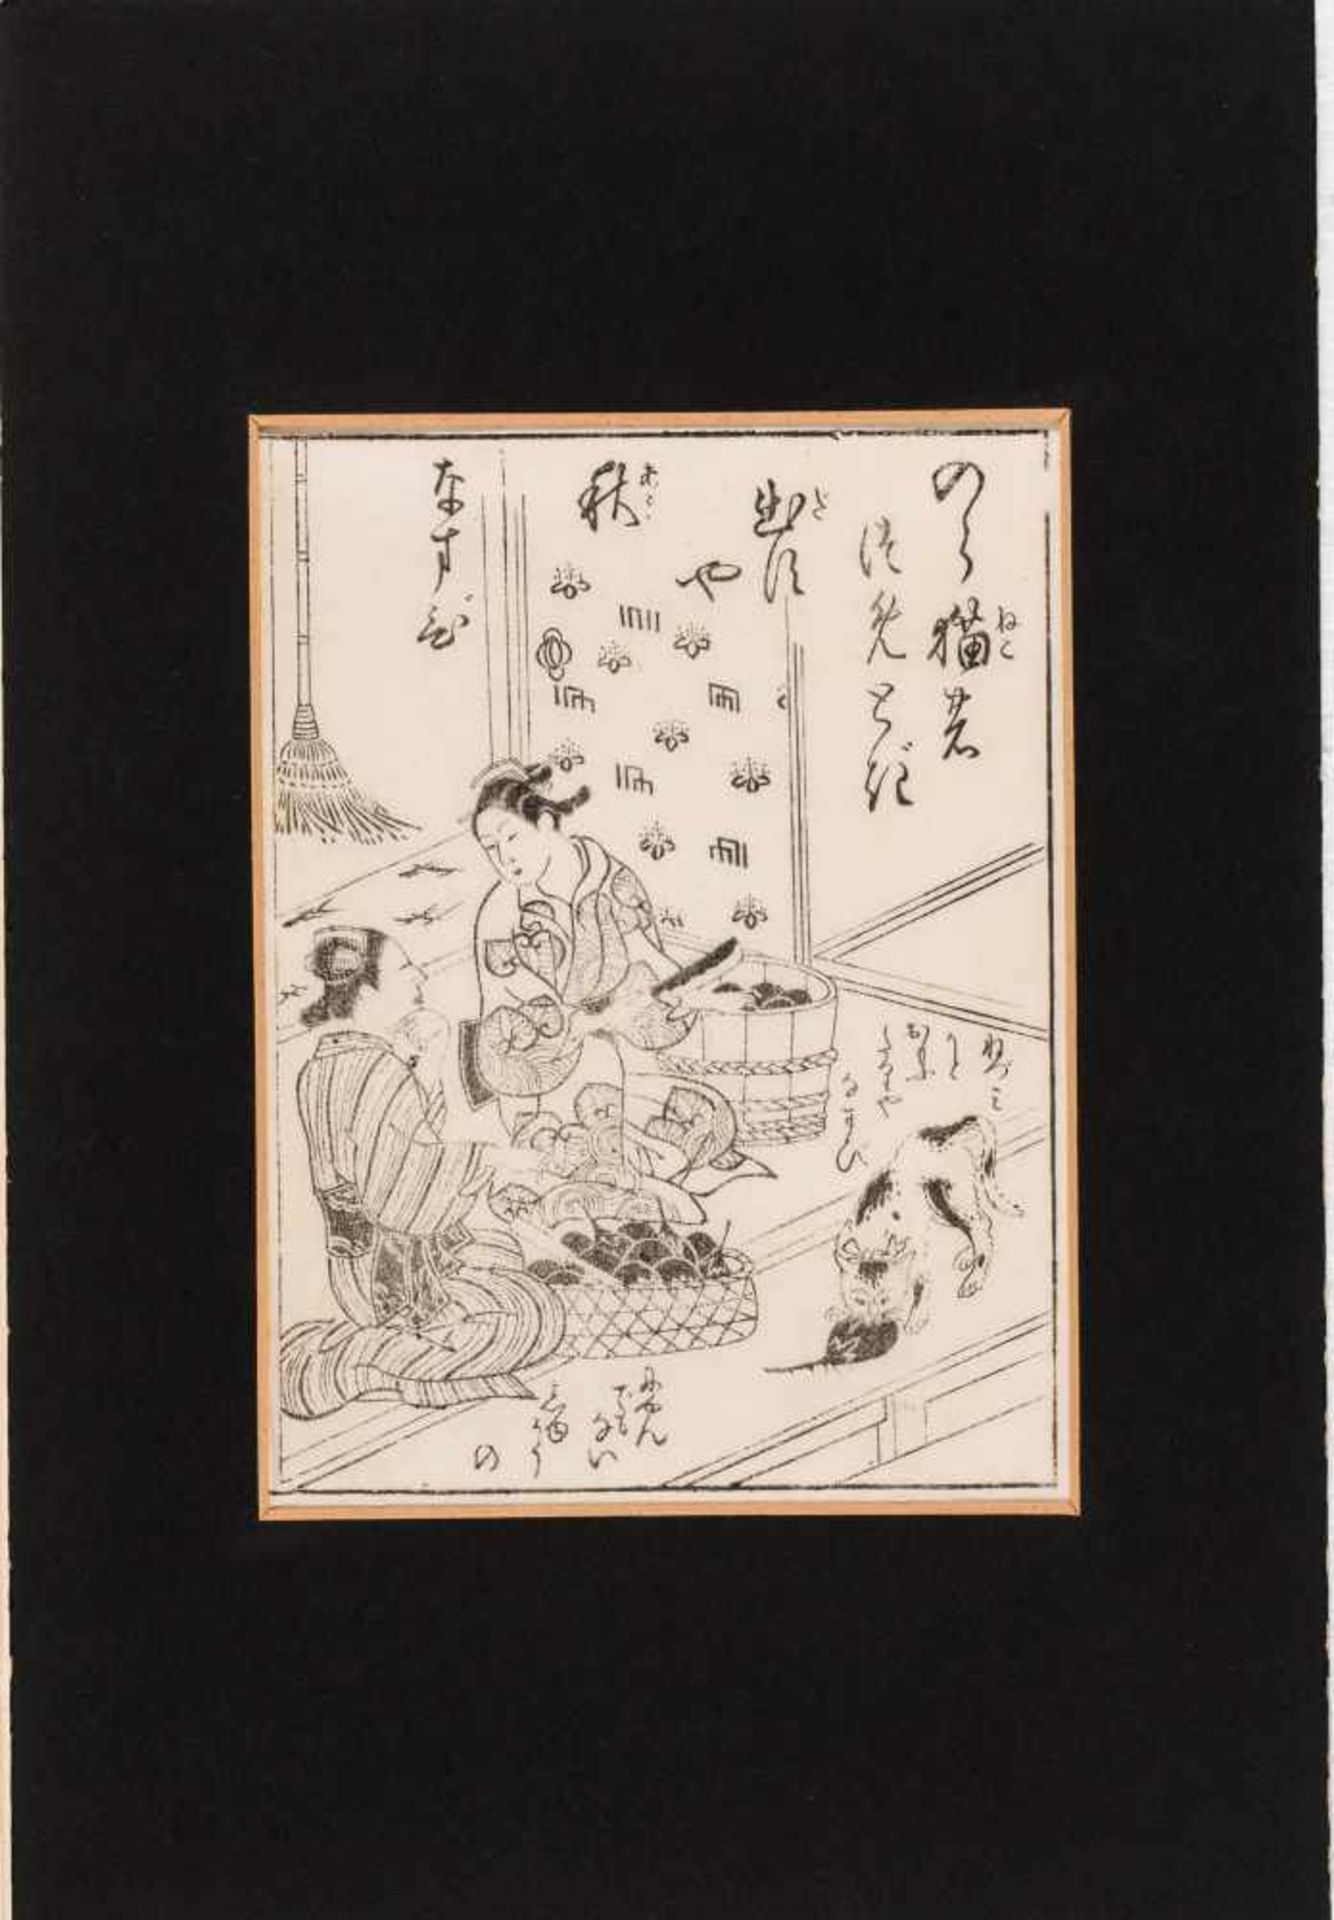 A GROUP OF EIGHT JAPANESE ORIGINAL WOODBLOCK PRINTS, 18TH CENTURYOriginal woodblock prints, - Image 6 of 9